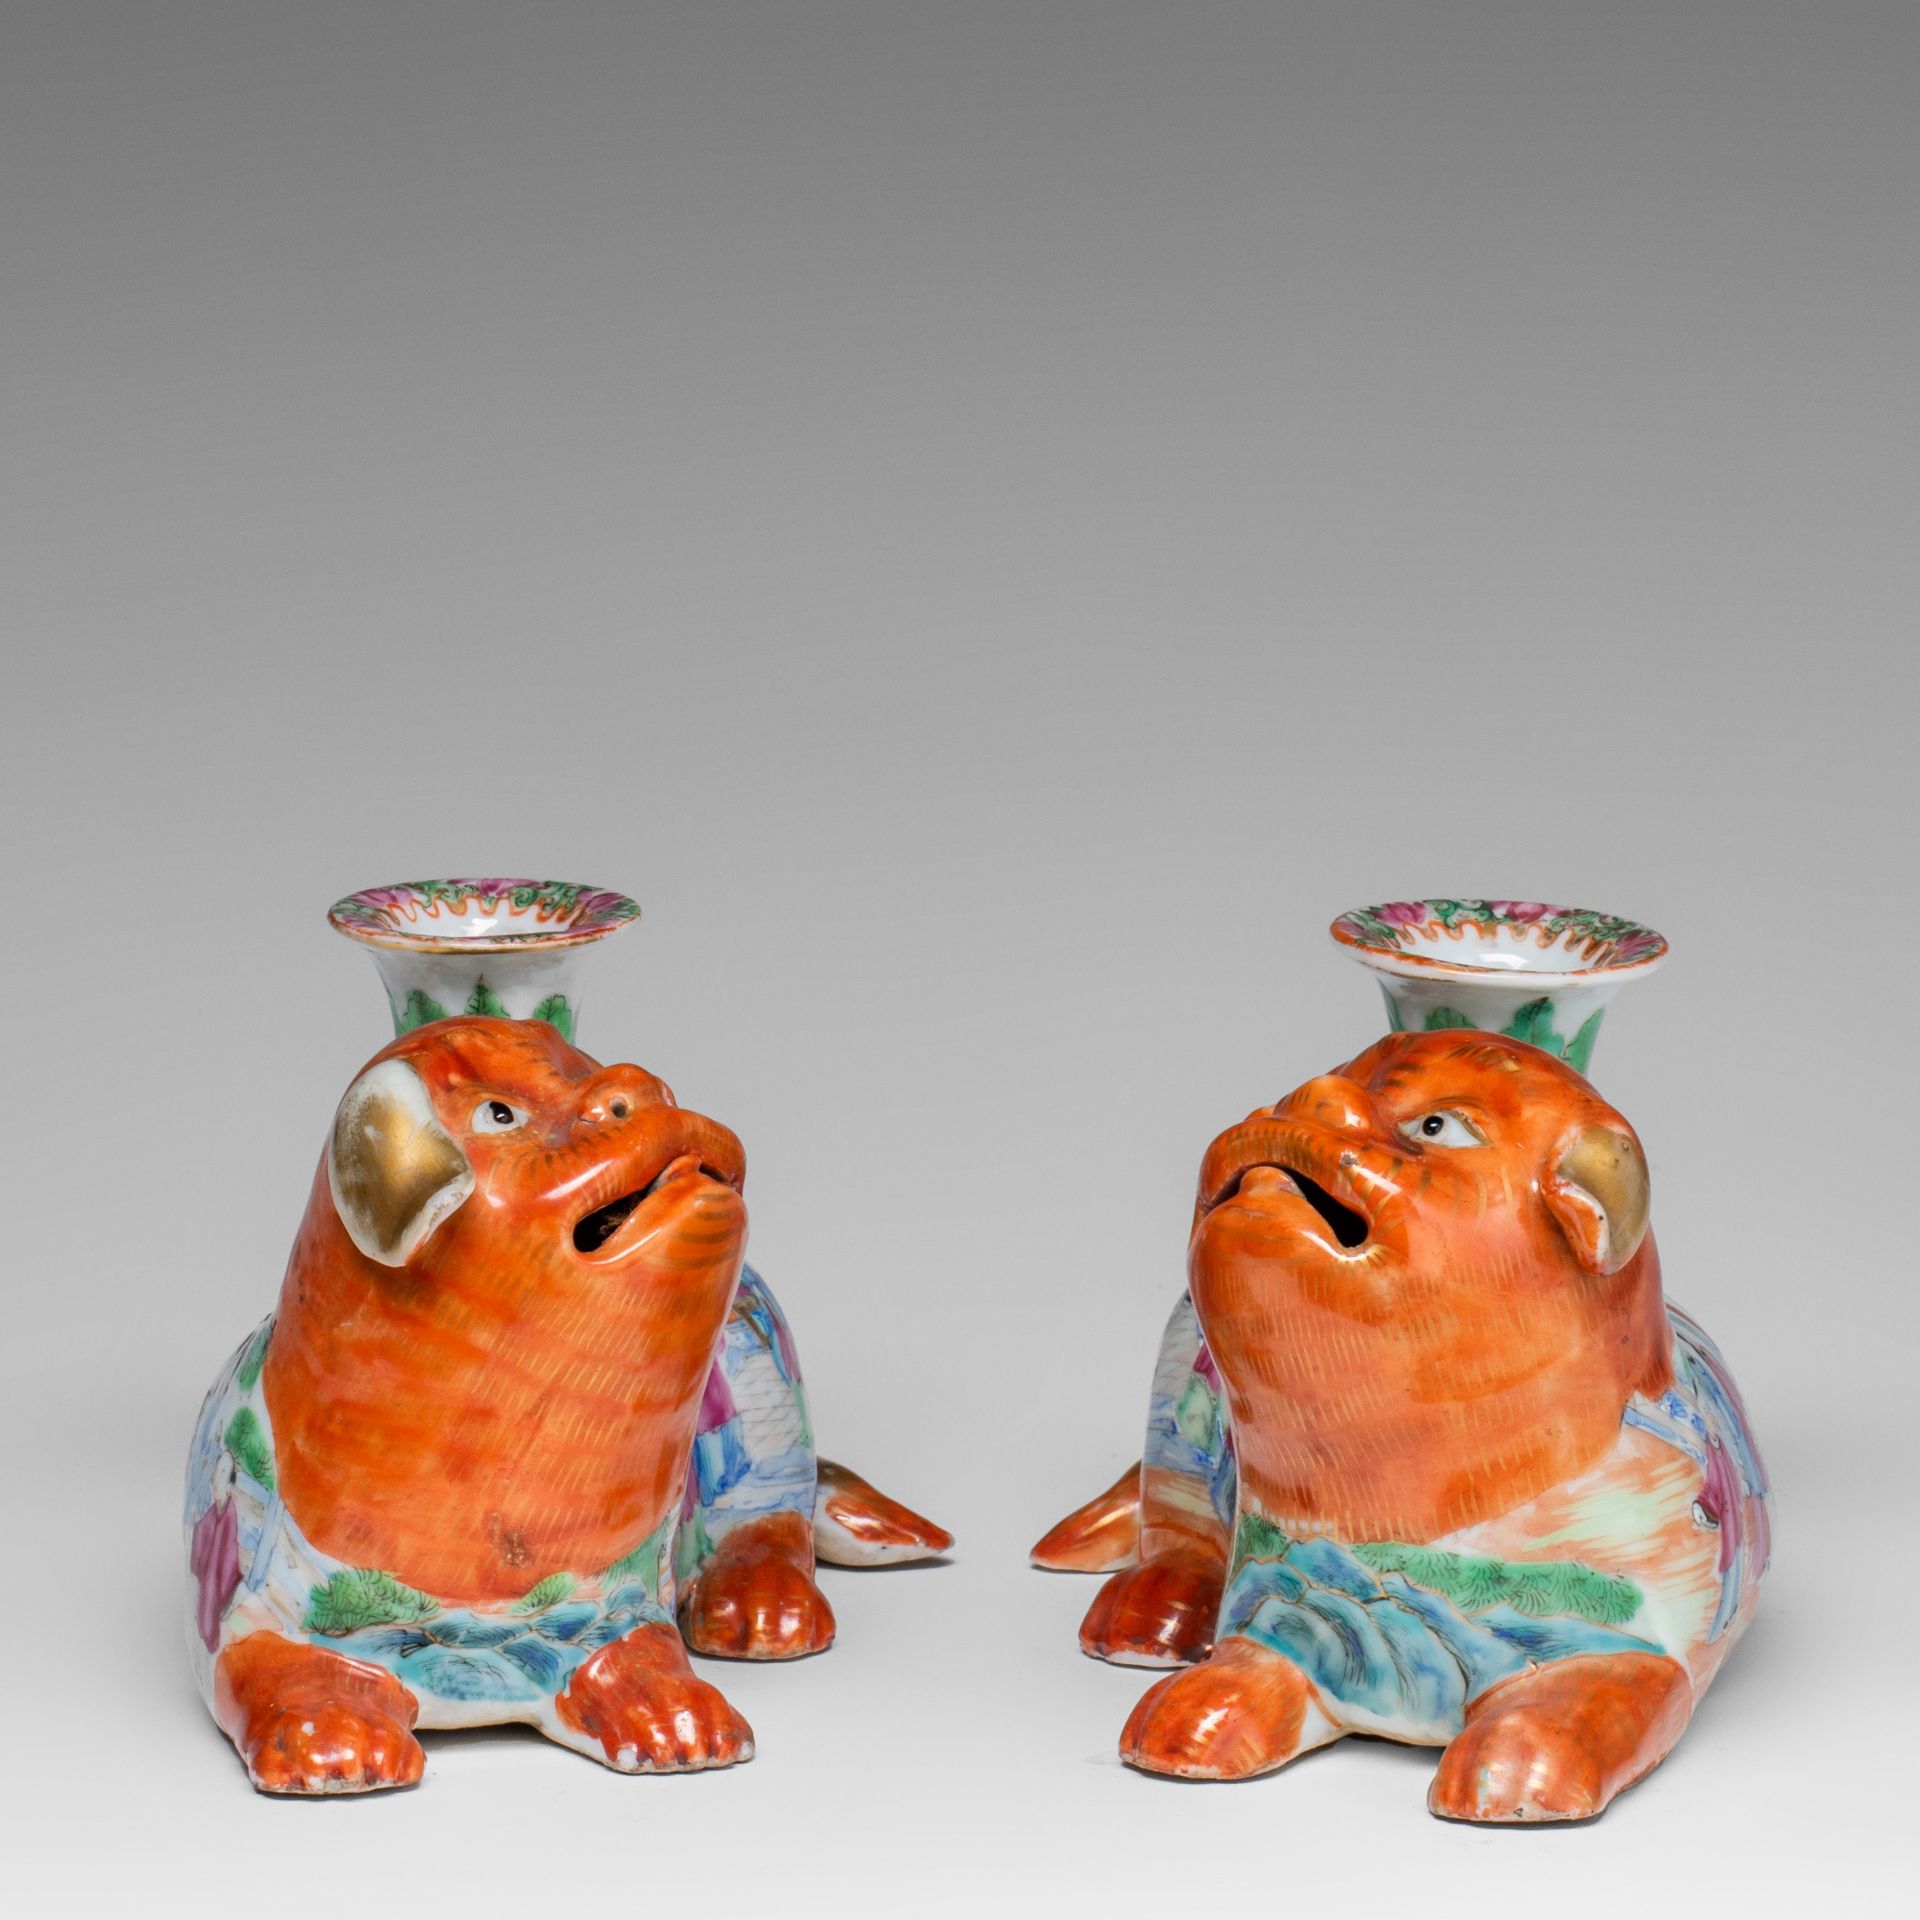 A fine pair of Chinese Canton joss stick holders in the shape of Fu dogs, 19thC, H 11,5 - L 20 cm - Image 6 of 9